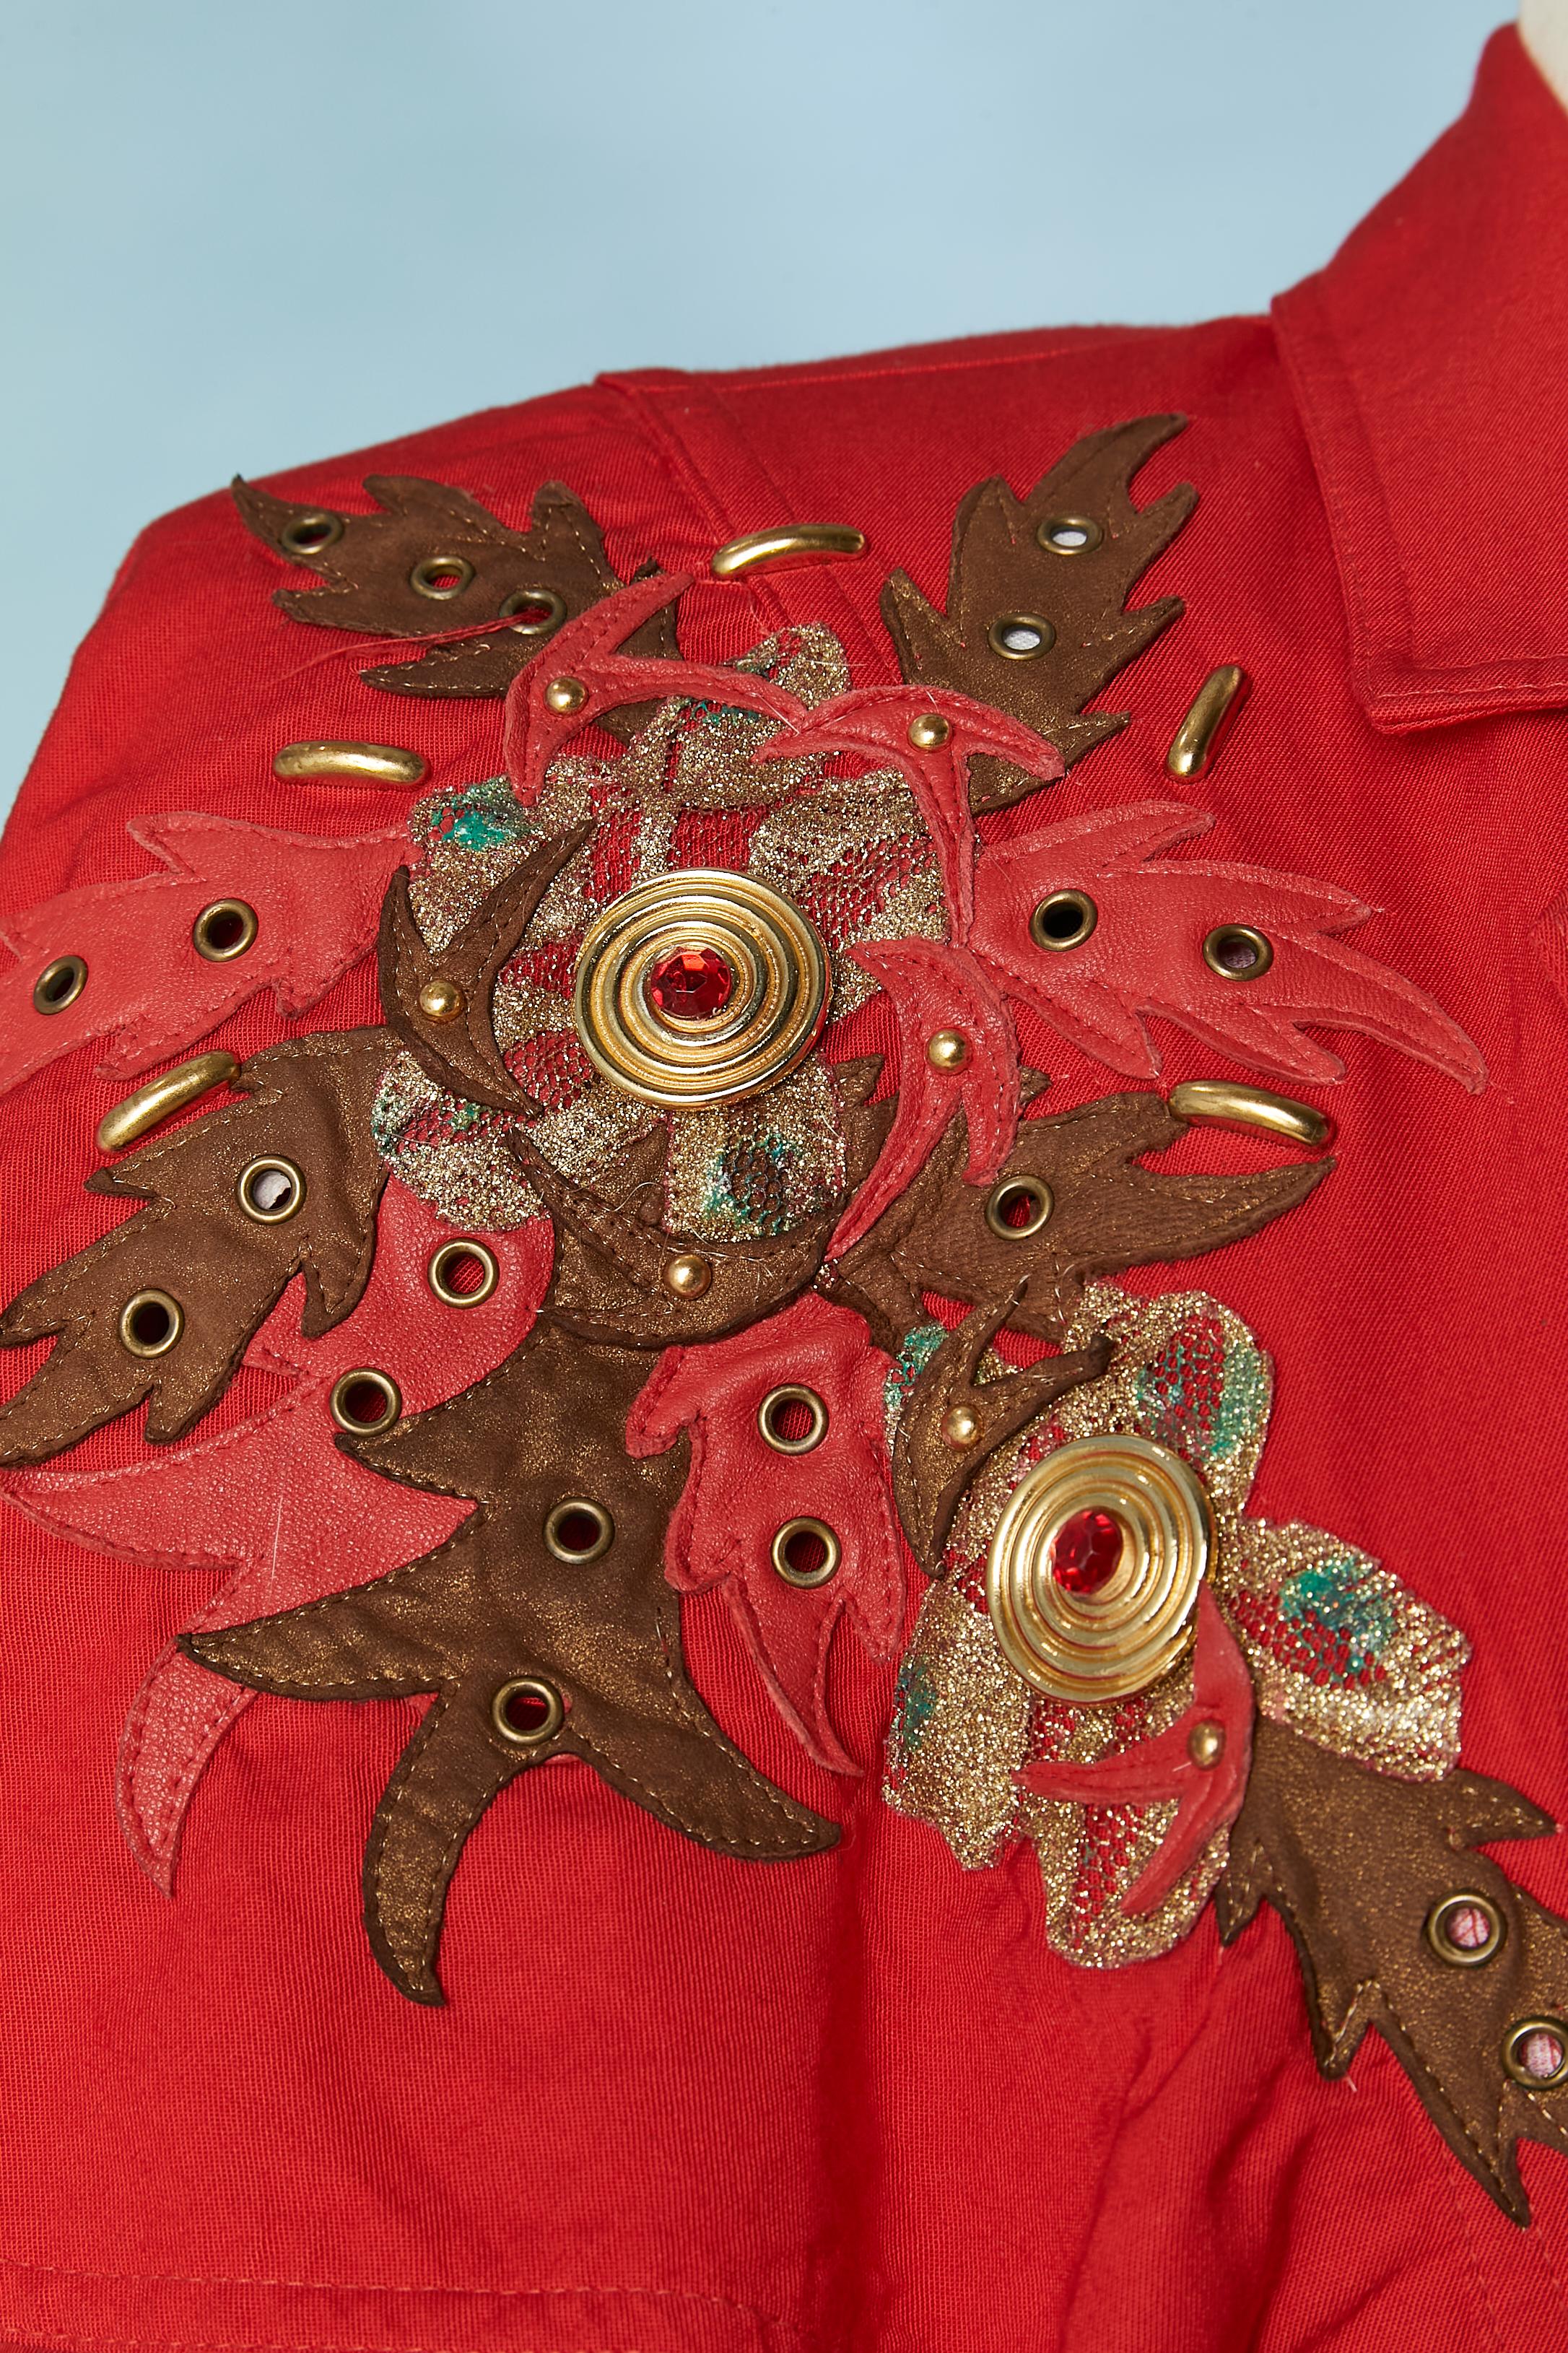 Red jacket with mini cape and leather and eyelet appliqué. Main fabric: 100% rayon. Lining: rayon or acetate. SHOULDER PADS. Buttons are covered in the same fabric. 
SIZE: M 